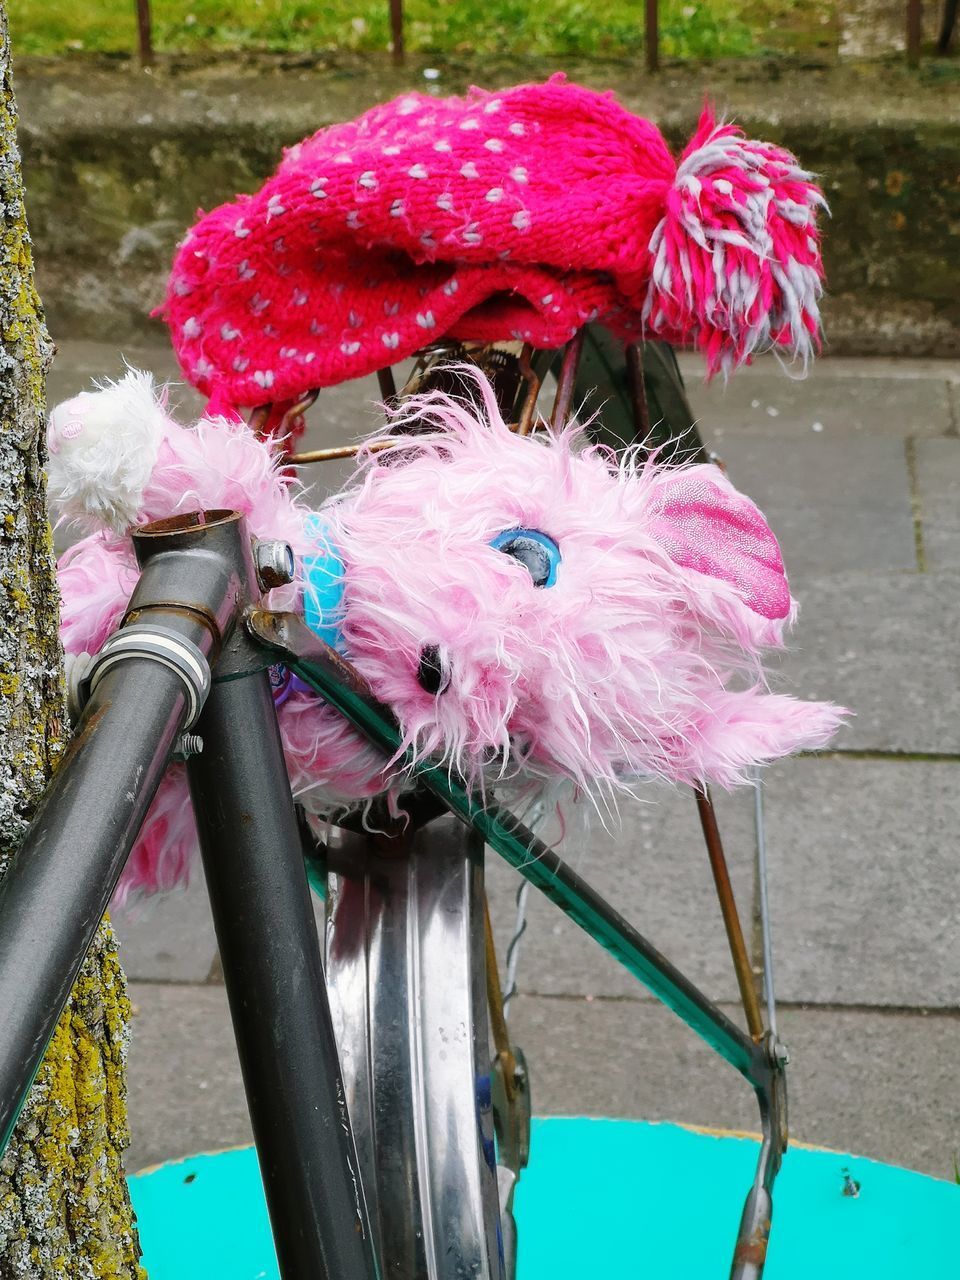 CLOSE-UP OF PINK FLOWER WITH BICYCLE ON METAL